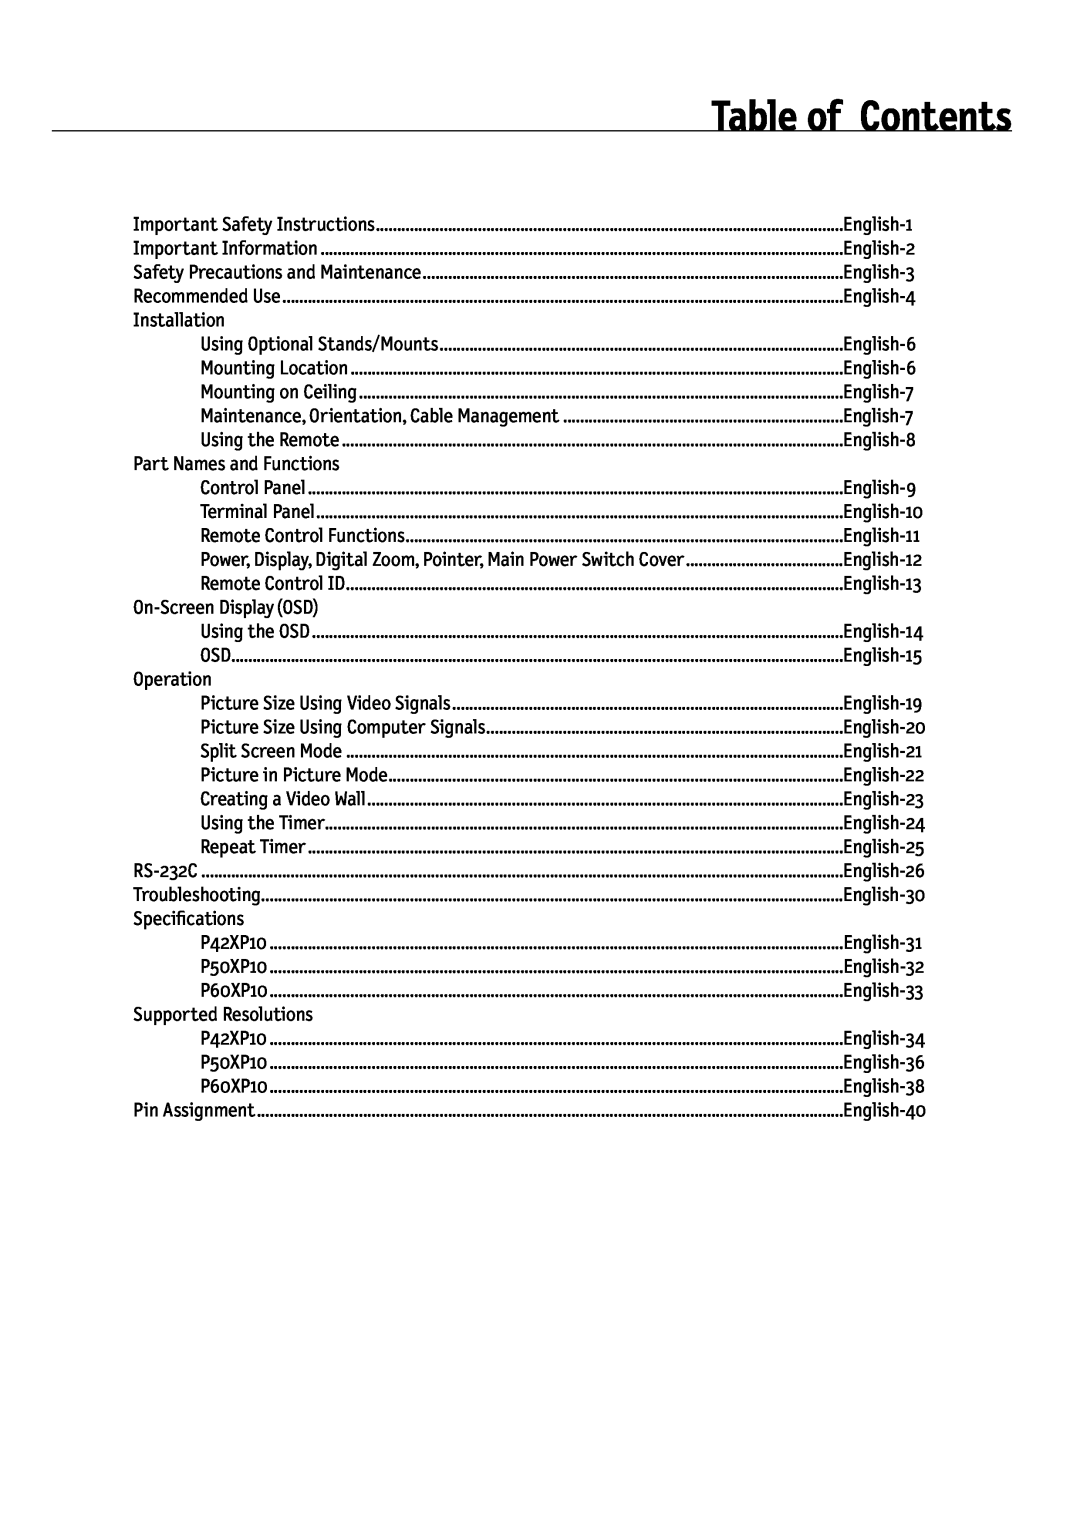 NEC 42XP10, 50XP10, 60XP10 user manual Table of Contents 